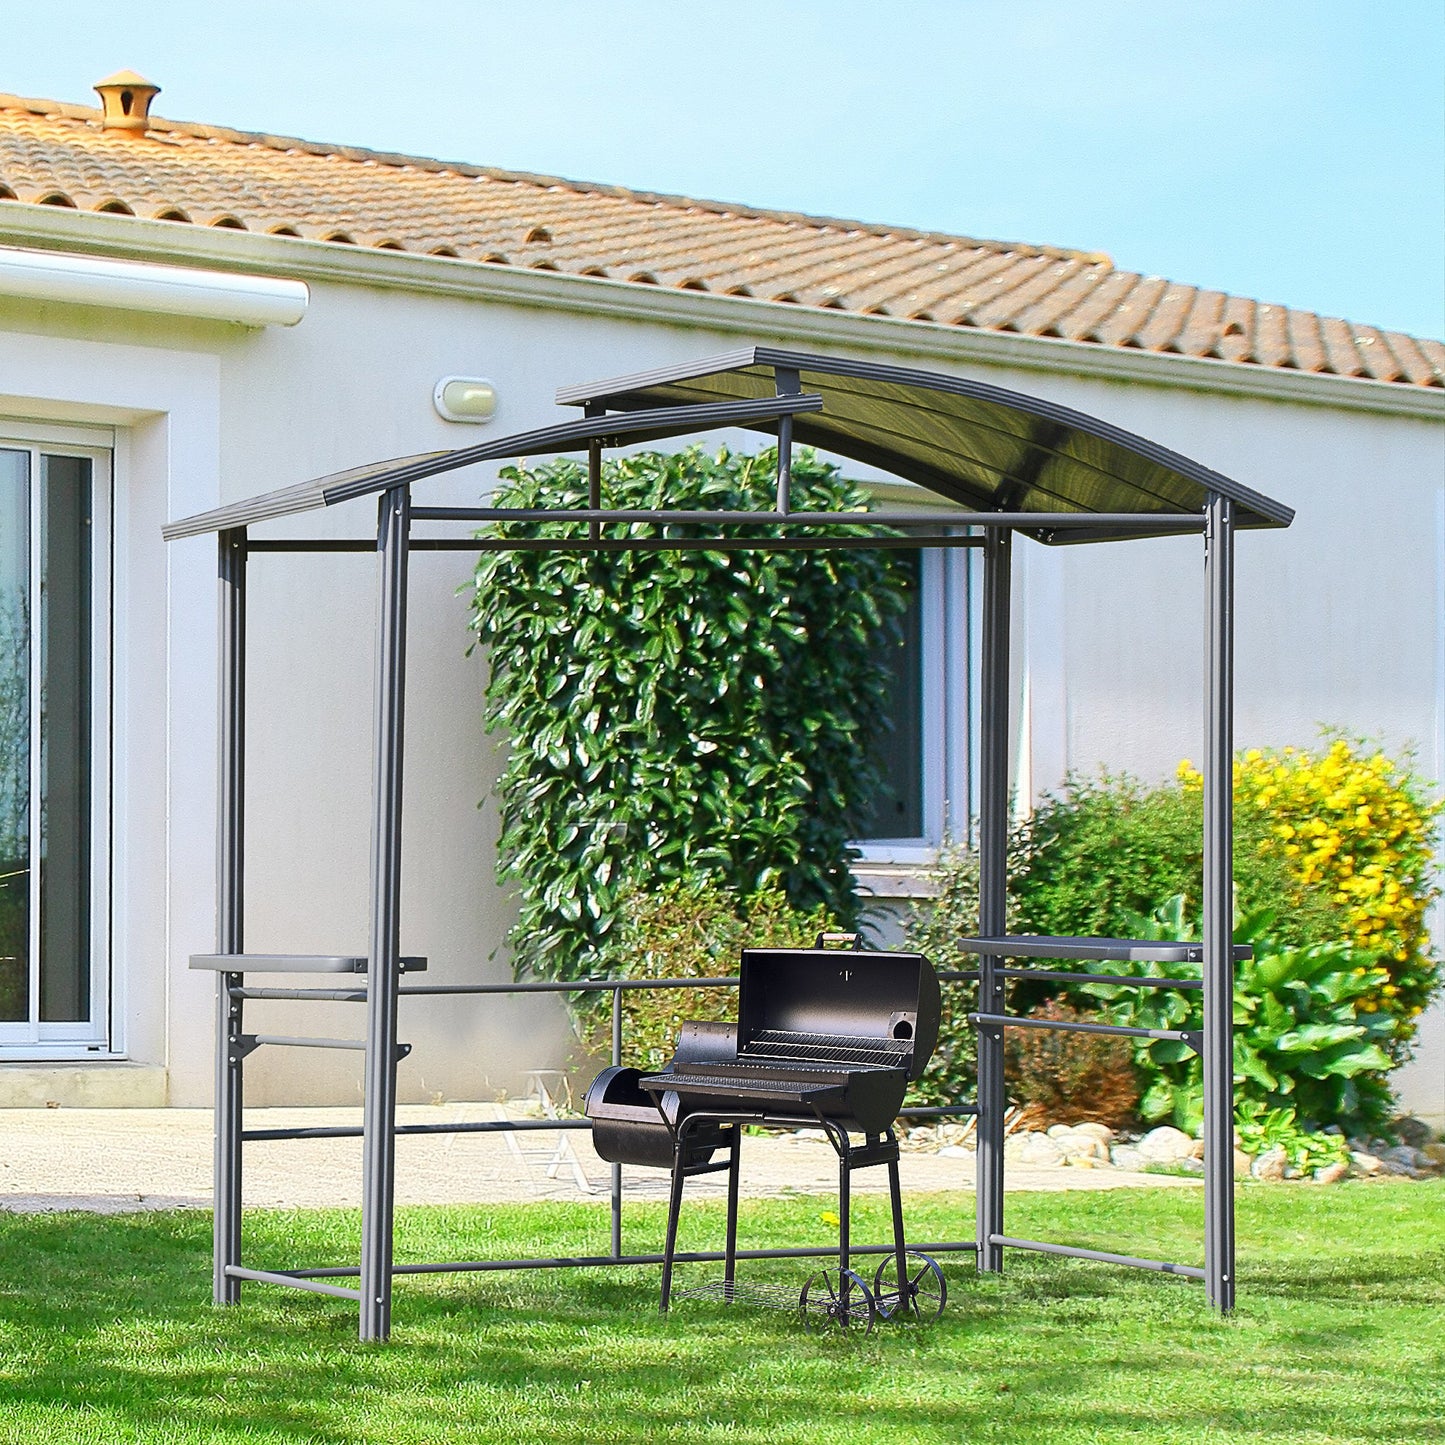 Outsunny Outdoor Grill BBQ Gazebo 2 Shelves and Poles for Hanging Tools Great Ventilation